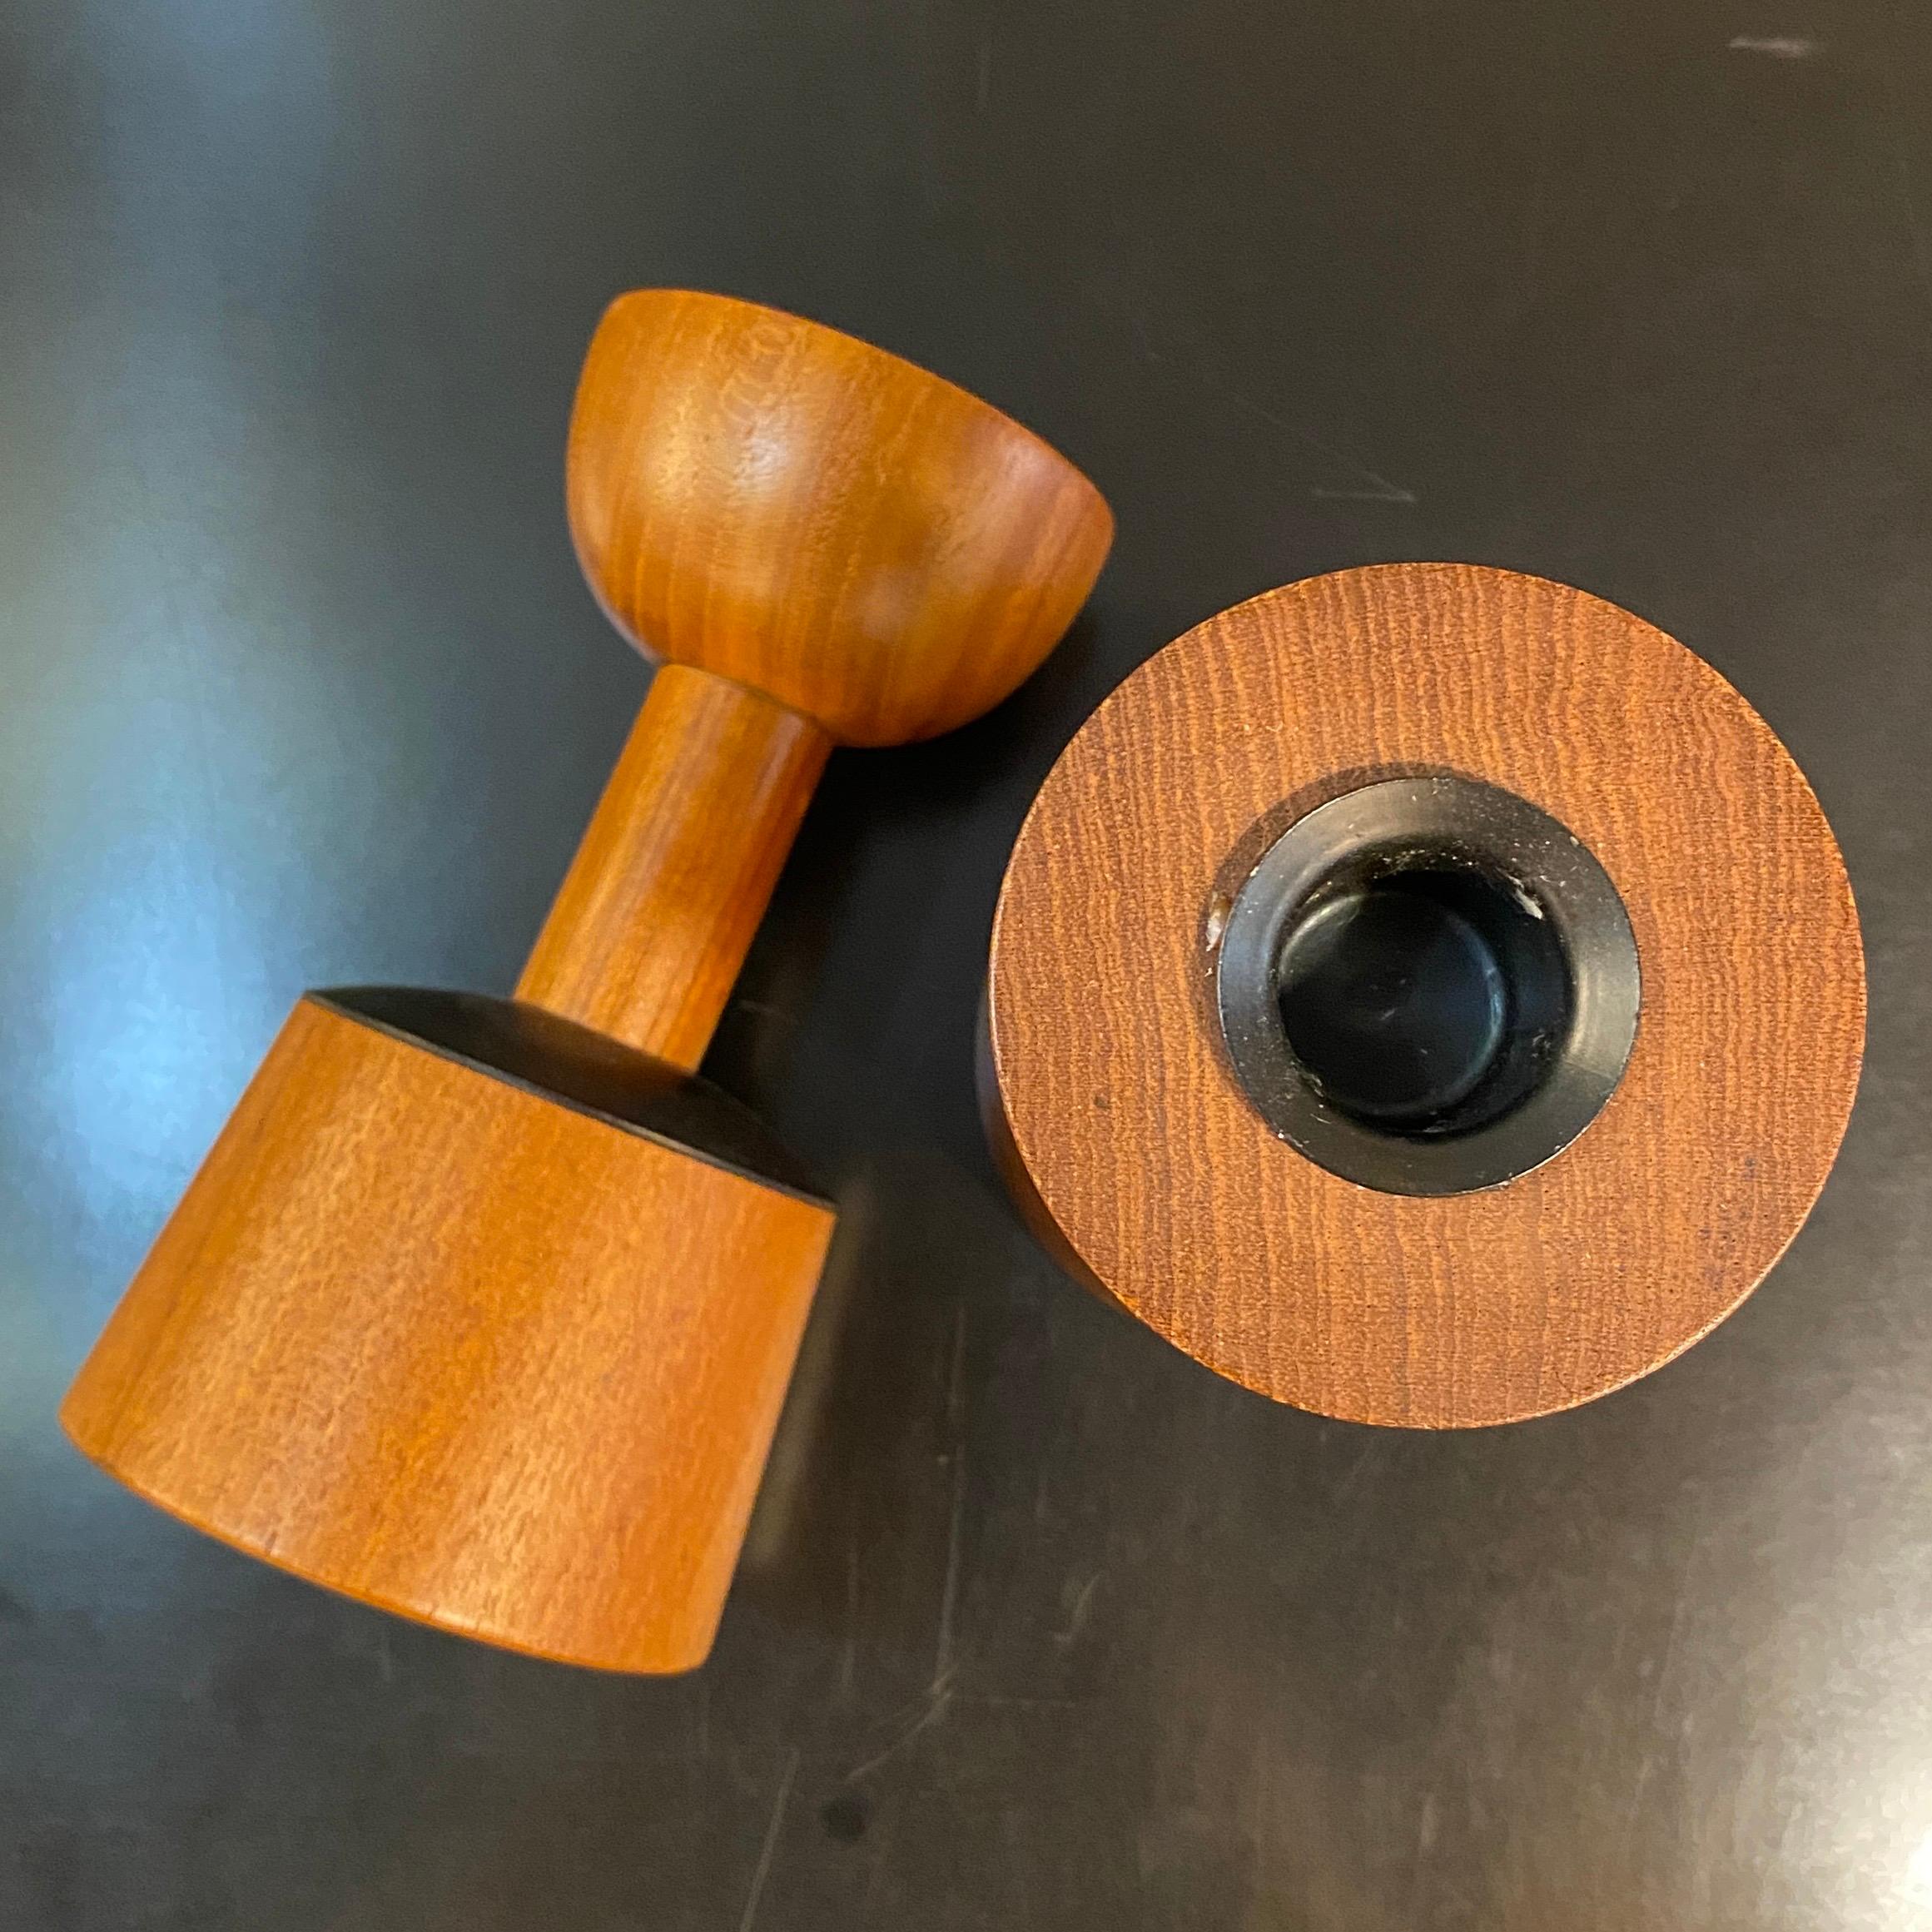 Scandinavian Modern Rosewood Candleholders By Laurids Lonborg In Good Condition For Sale In Brooklyn, NY